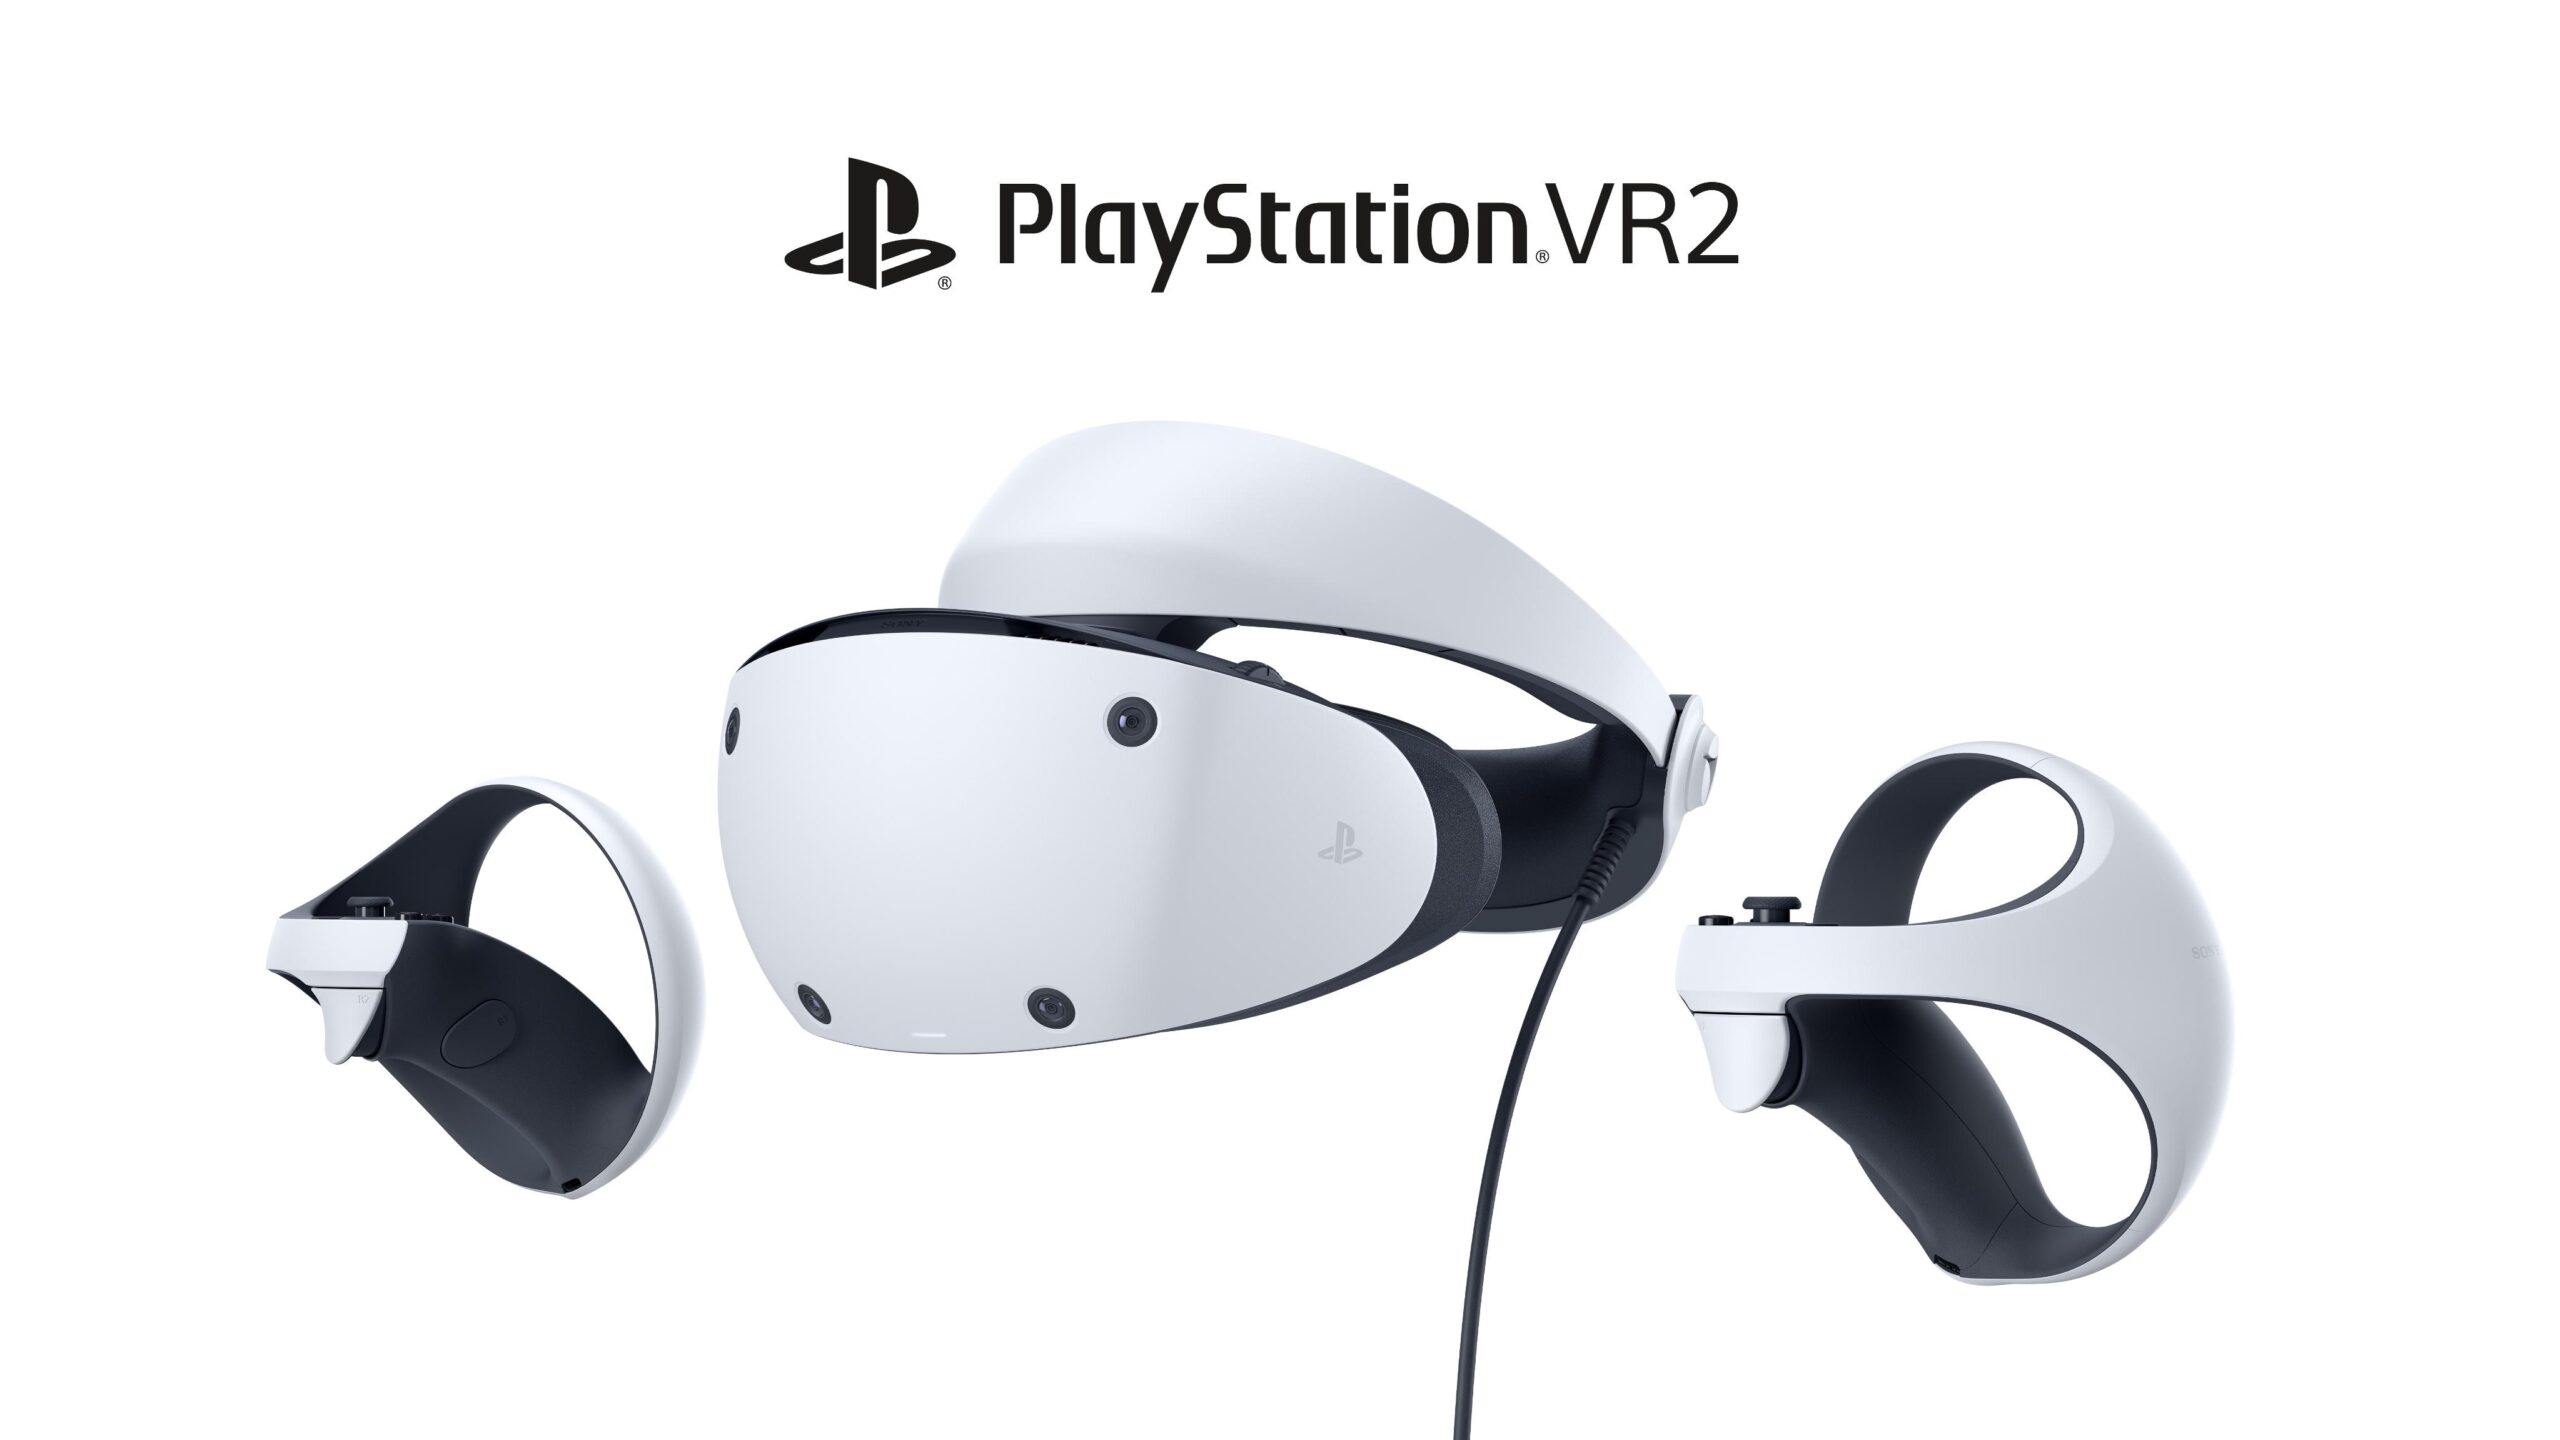 Will the PSVR 2 Work on PC?